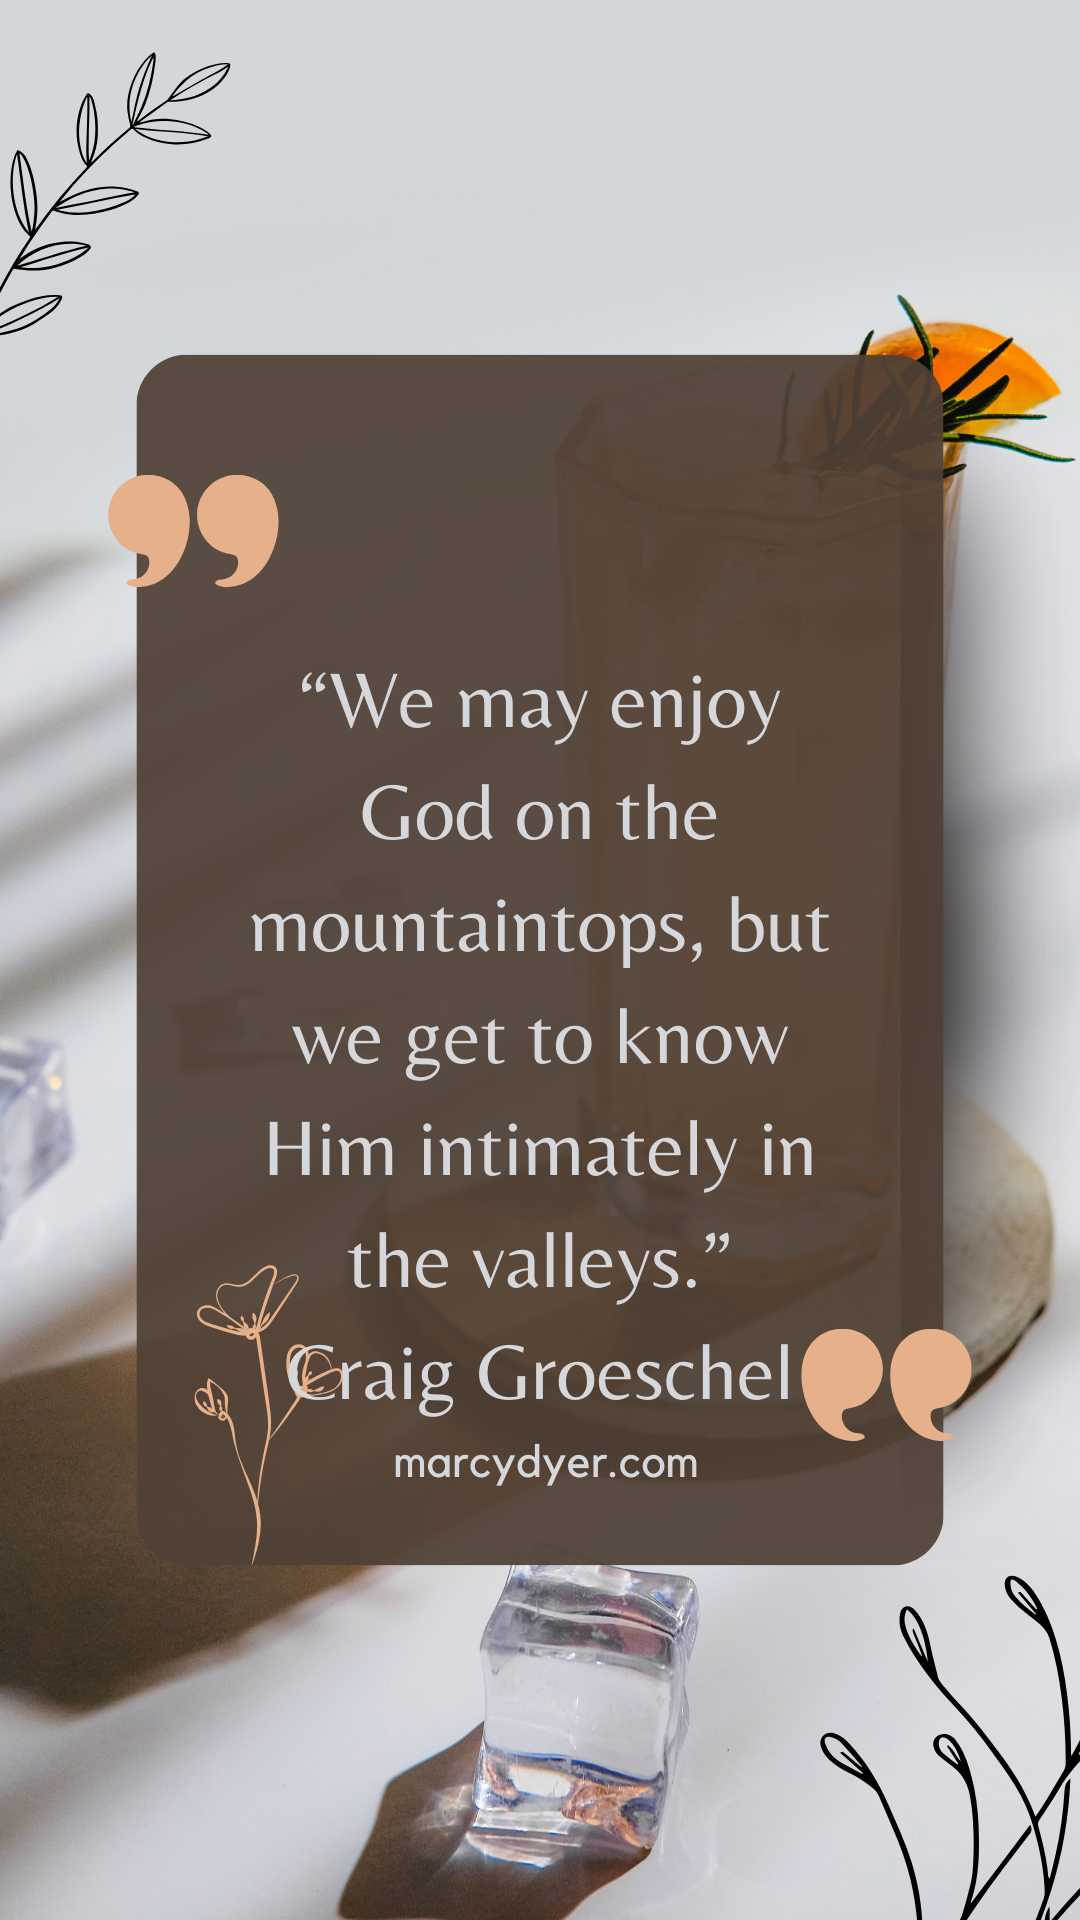 White background with a brown banner and Craig Groeschel quote: “We may enjoy God on the mountaintops, but we get to know Him intimately in the valleys.”